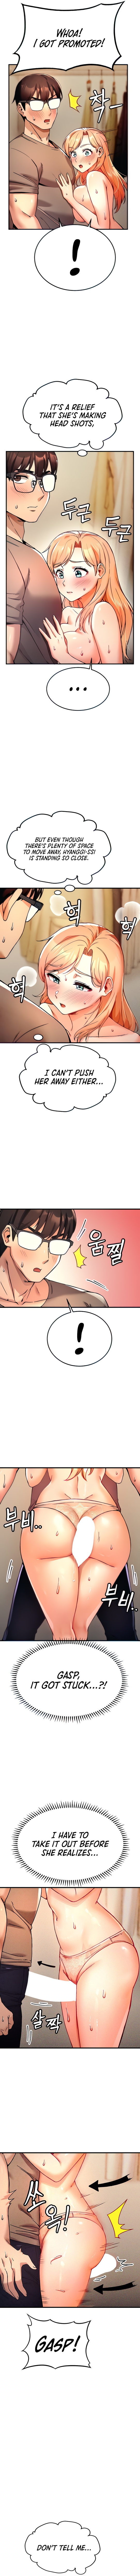 Kangcheol’s Bosses - Chapter 3 Page 3